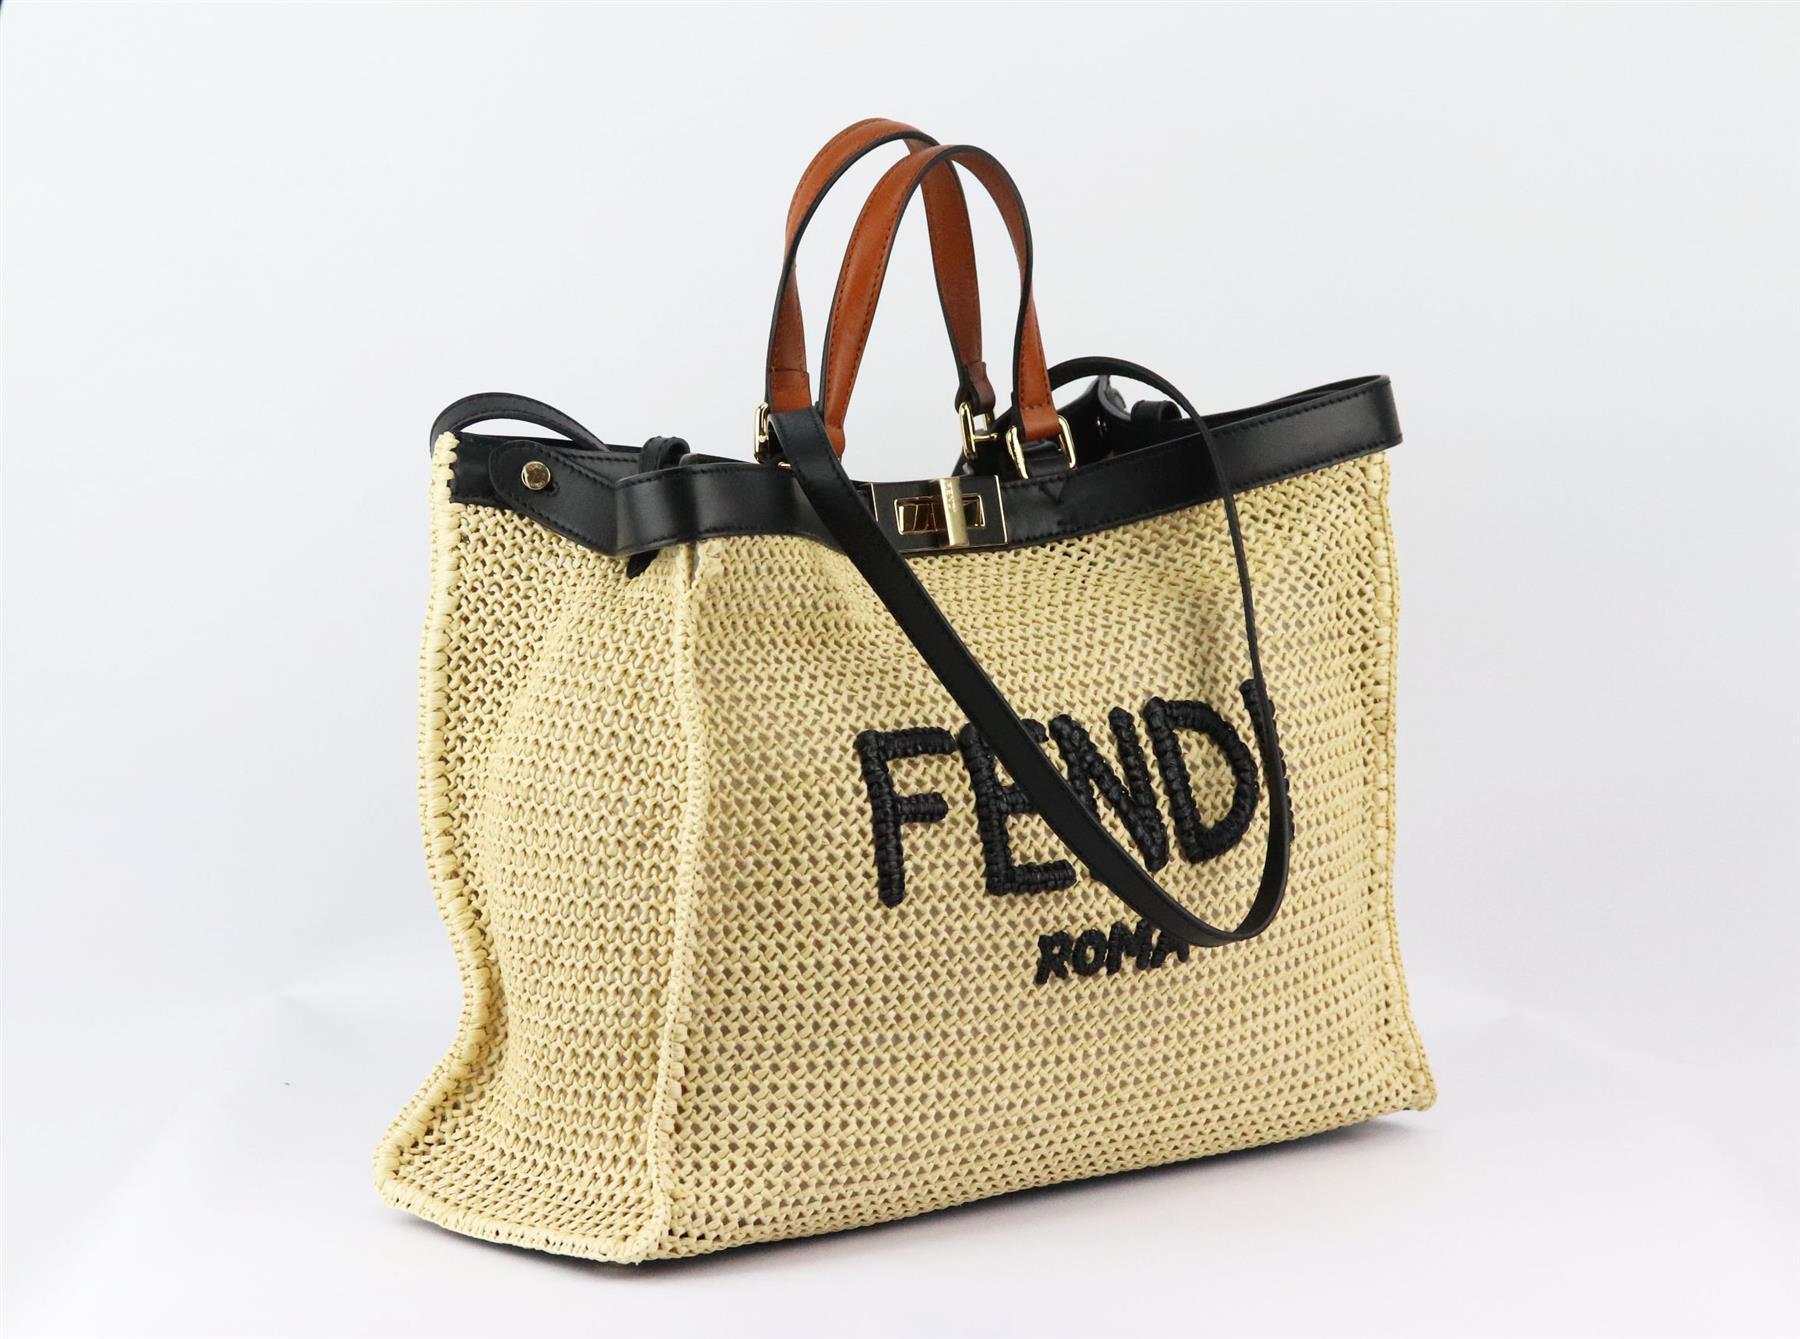 This iconic 'Peekaboo’ X-Tote' Medium tote bag by Fendi gets a trendy update in beige straw with a woven logo motif on the front, trimmed with black and brown leather and decorated with the classic twist lock, it has a large internal compartment and